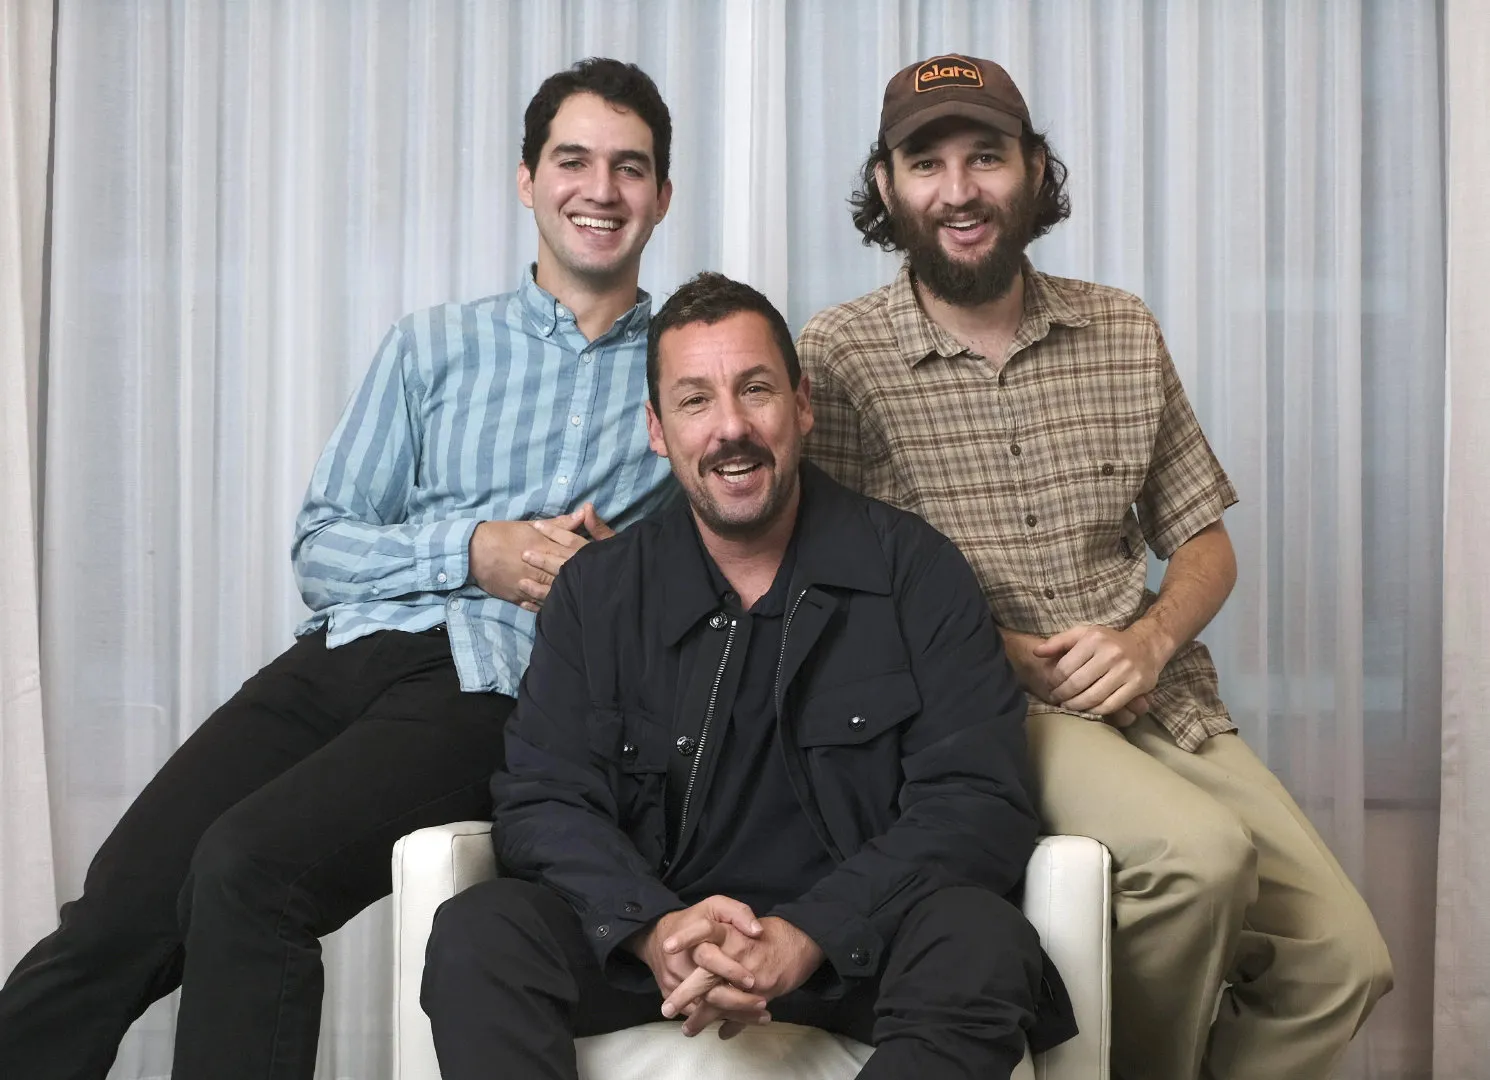 Adam Sandler to star in new untitled Netflix film, directed, written and produced by Ben Safdie and Joshua Safdie | FMV6